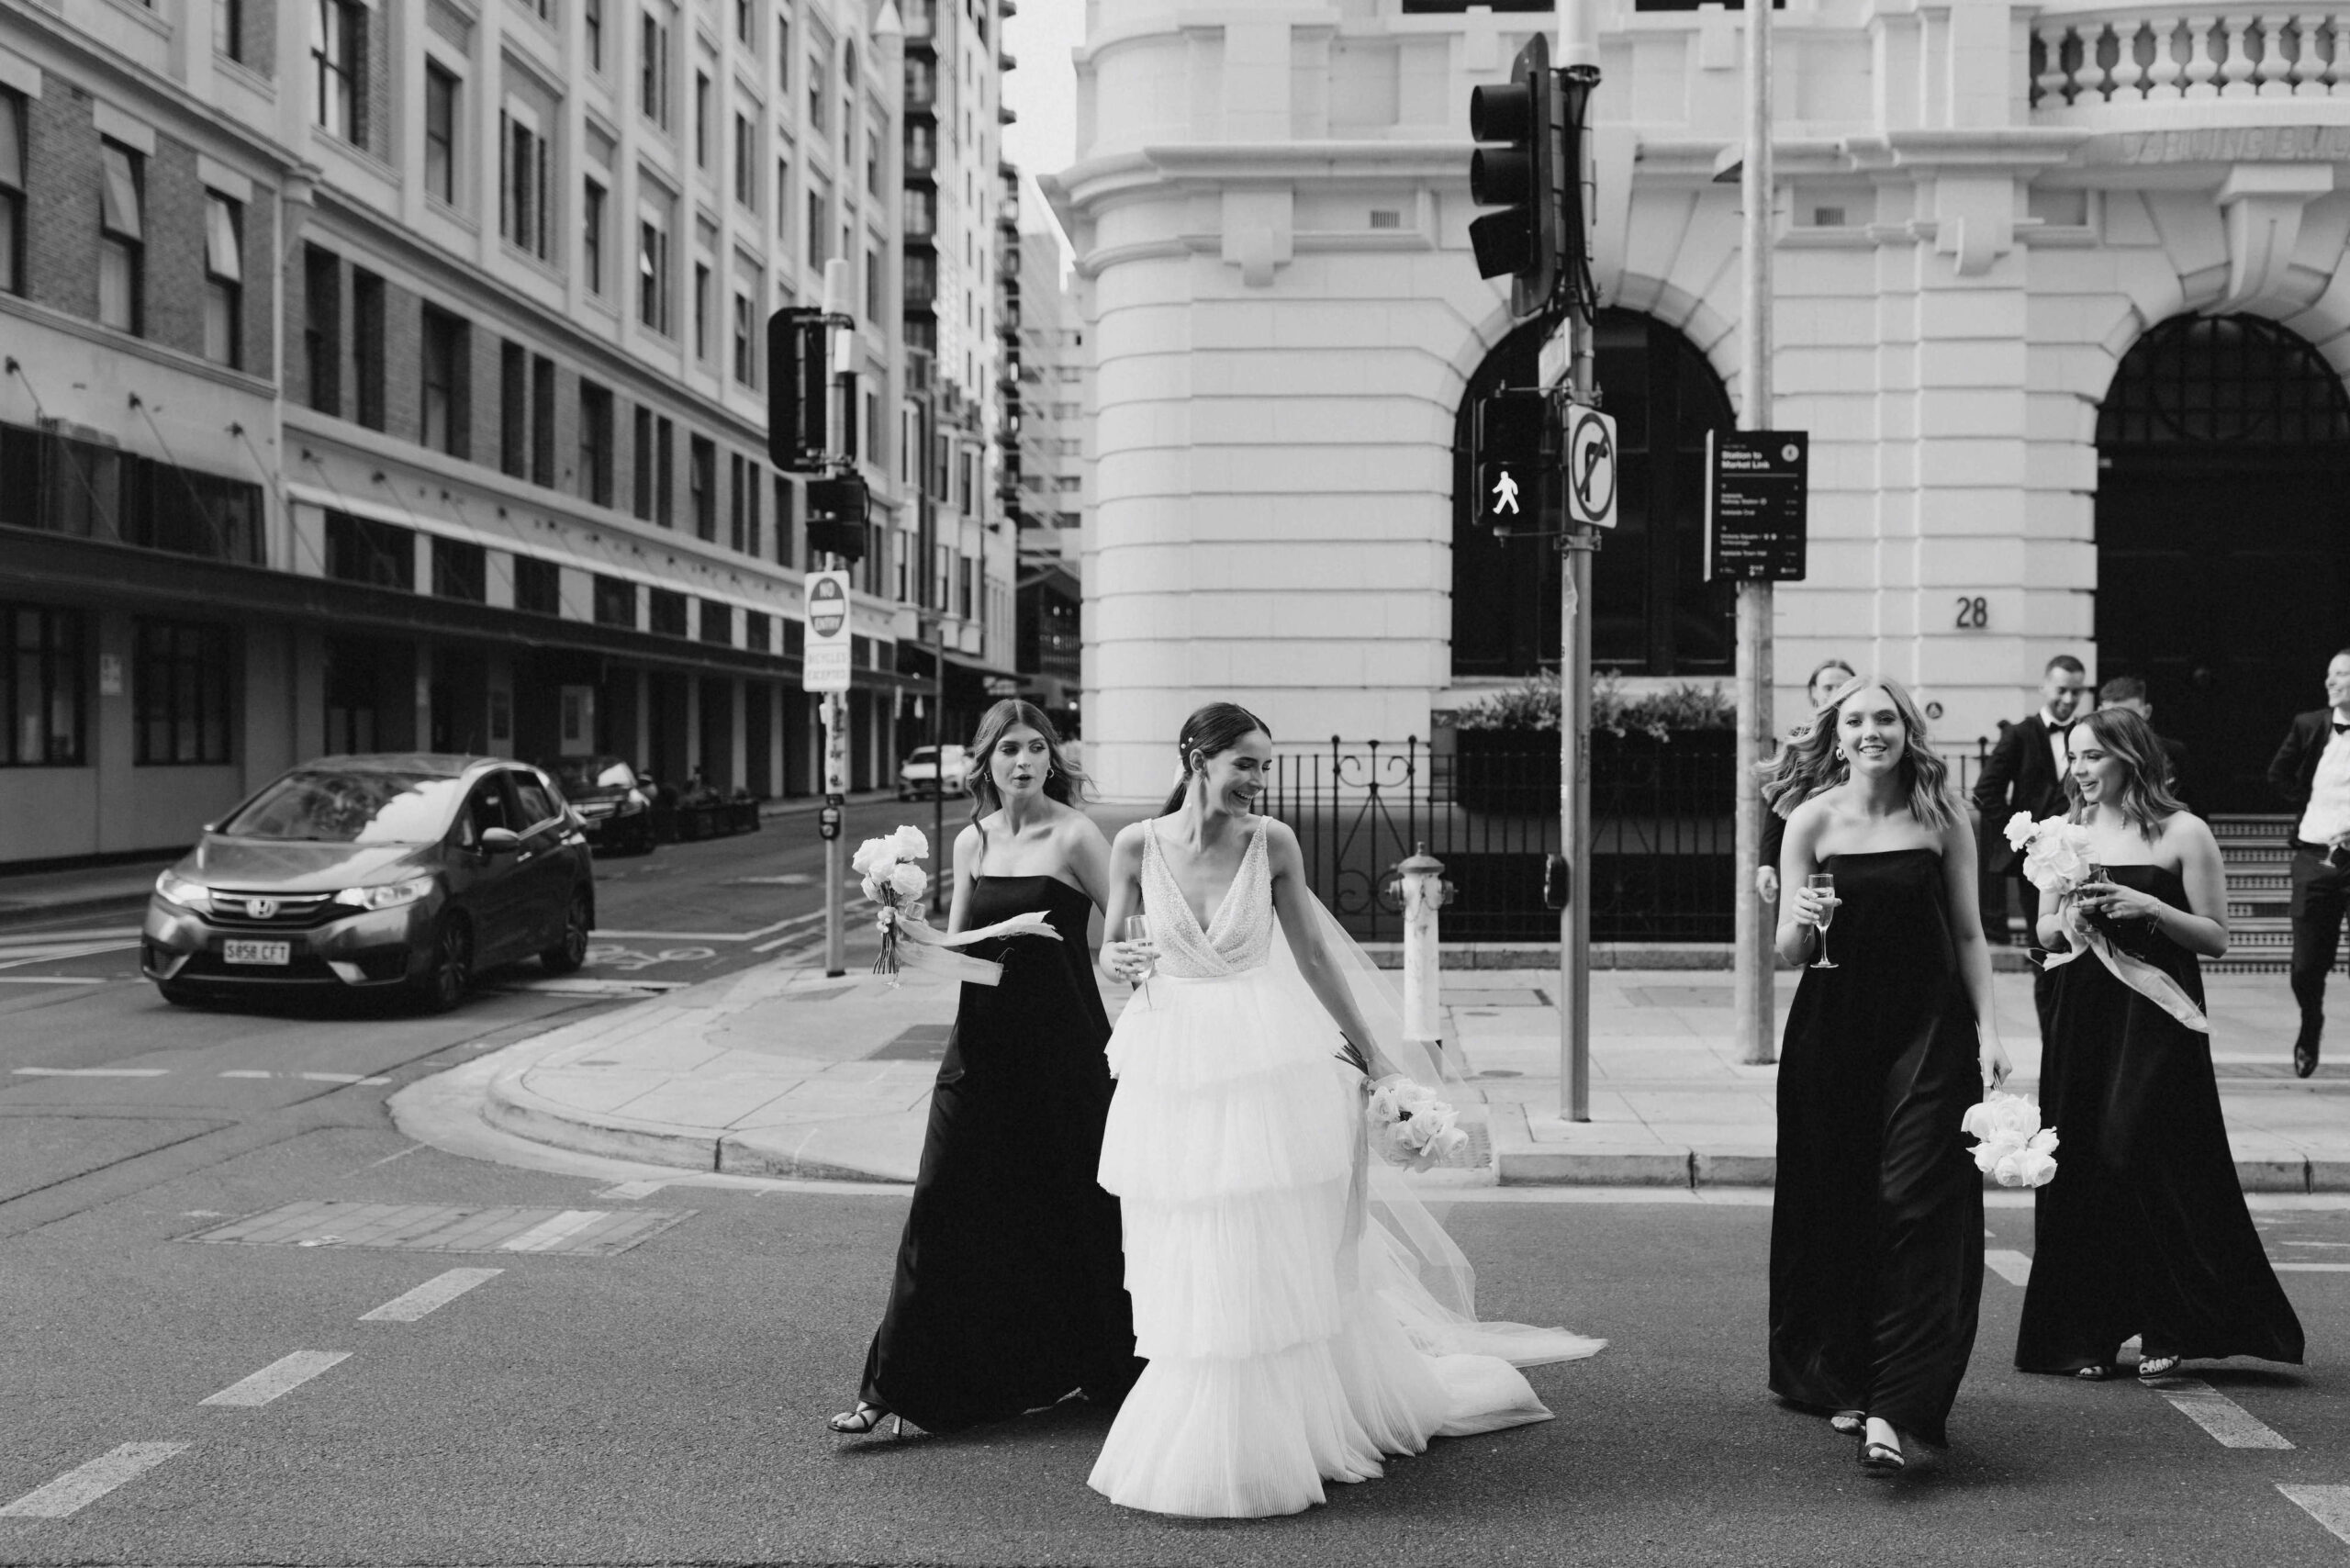 Bethany and bridesmaids walking across a city intersection